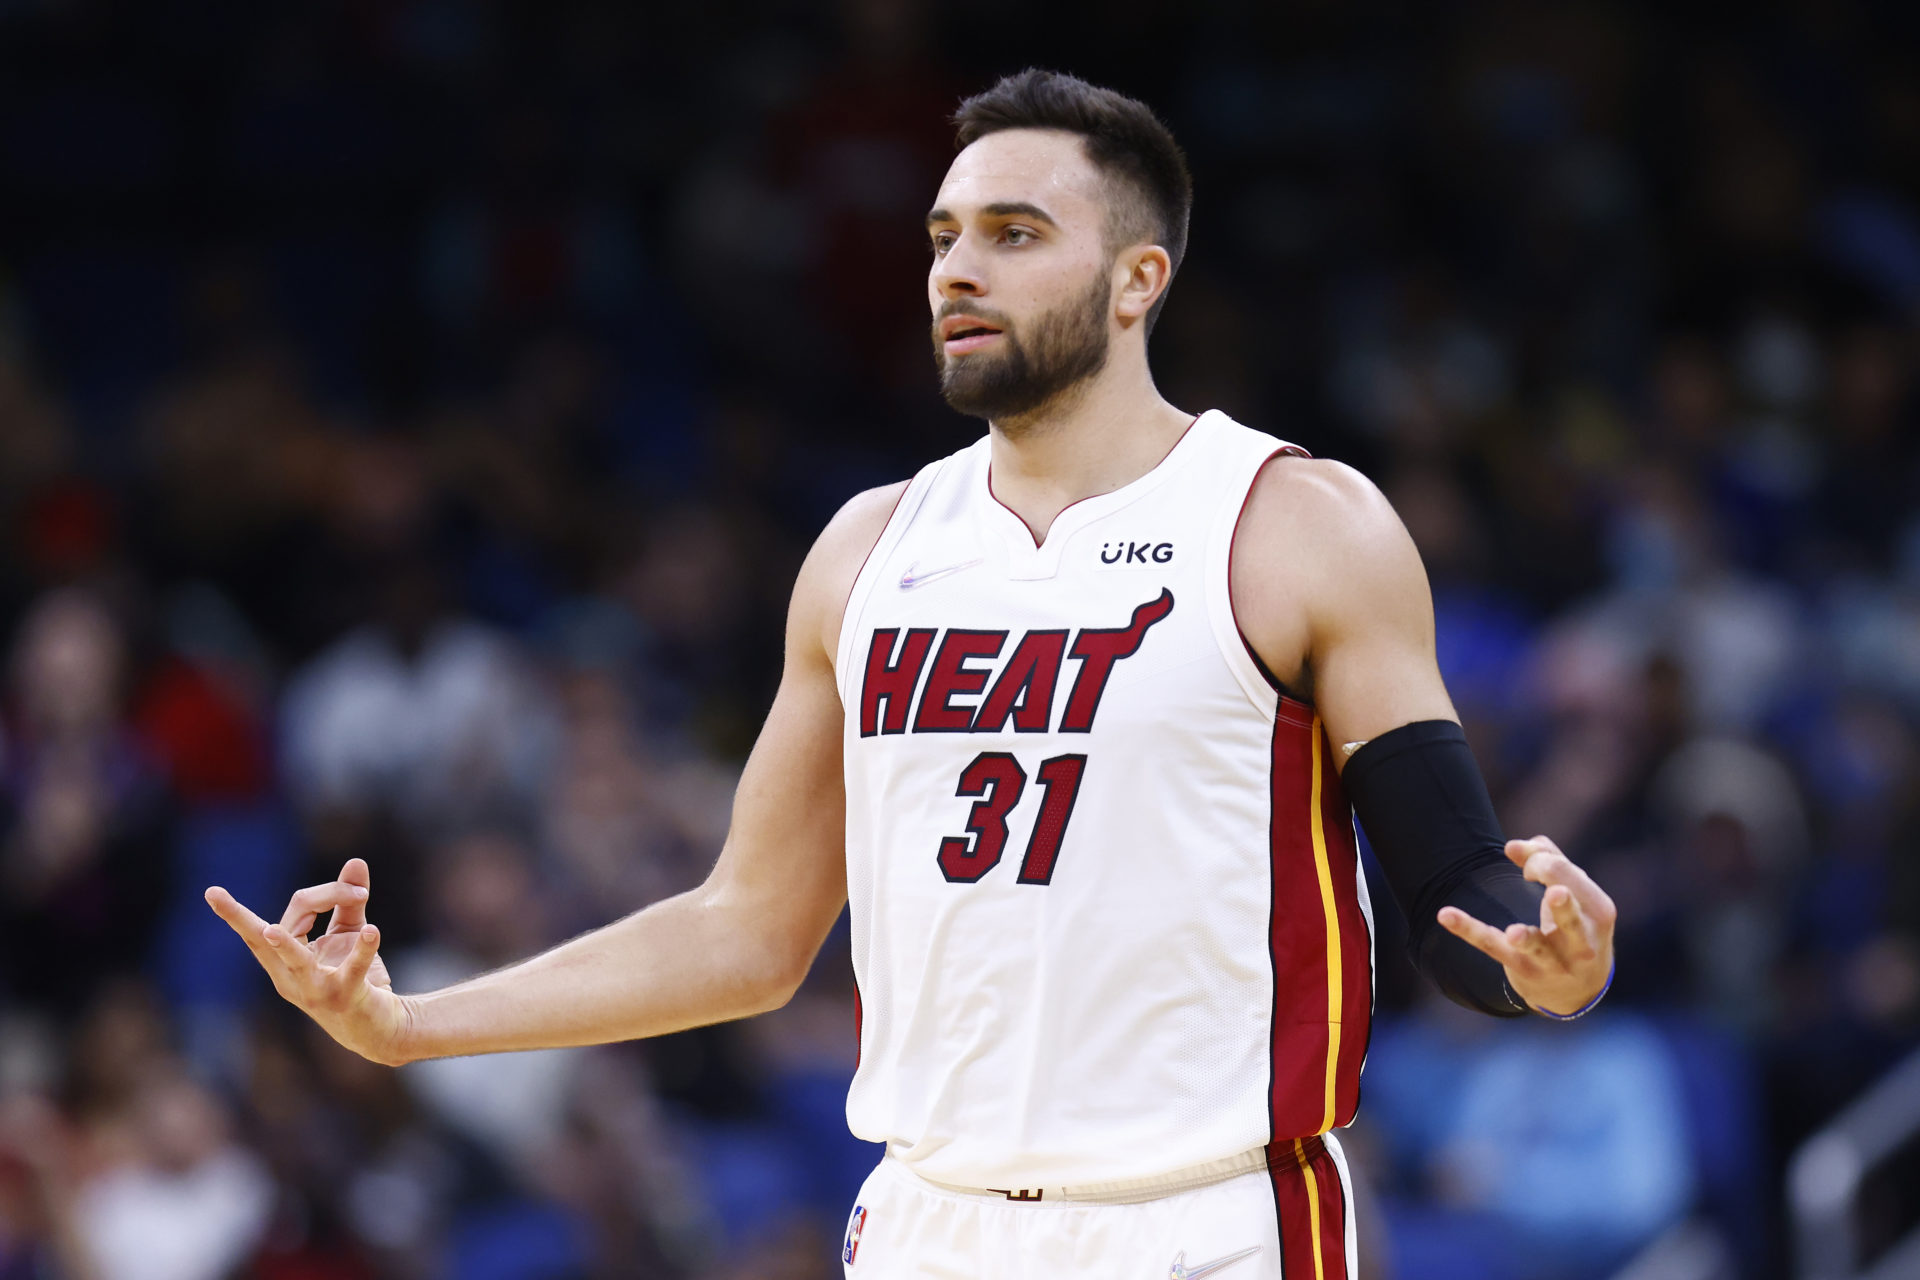 Max Strus' parents, ethnicity, and nationality ahead of Heat vs